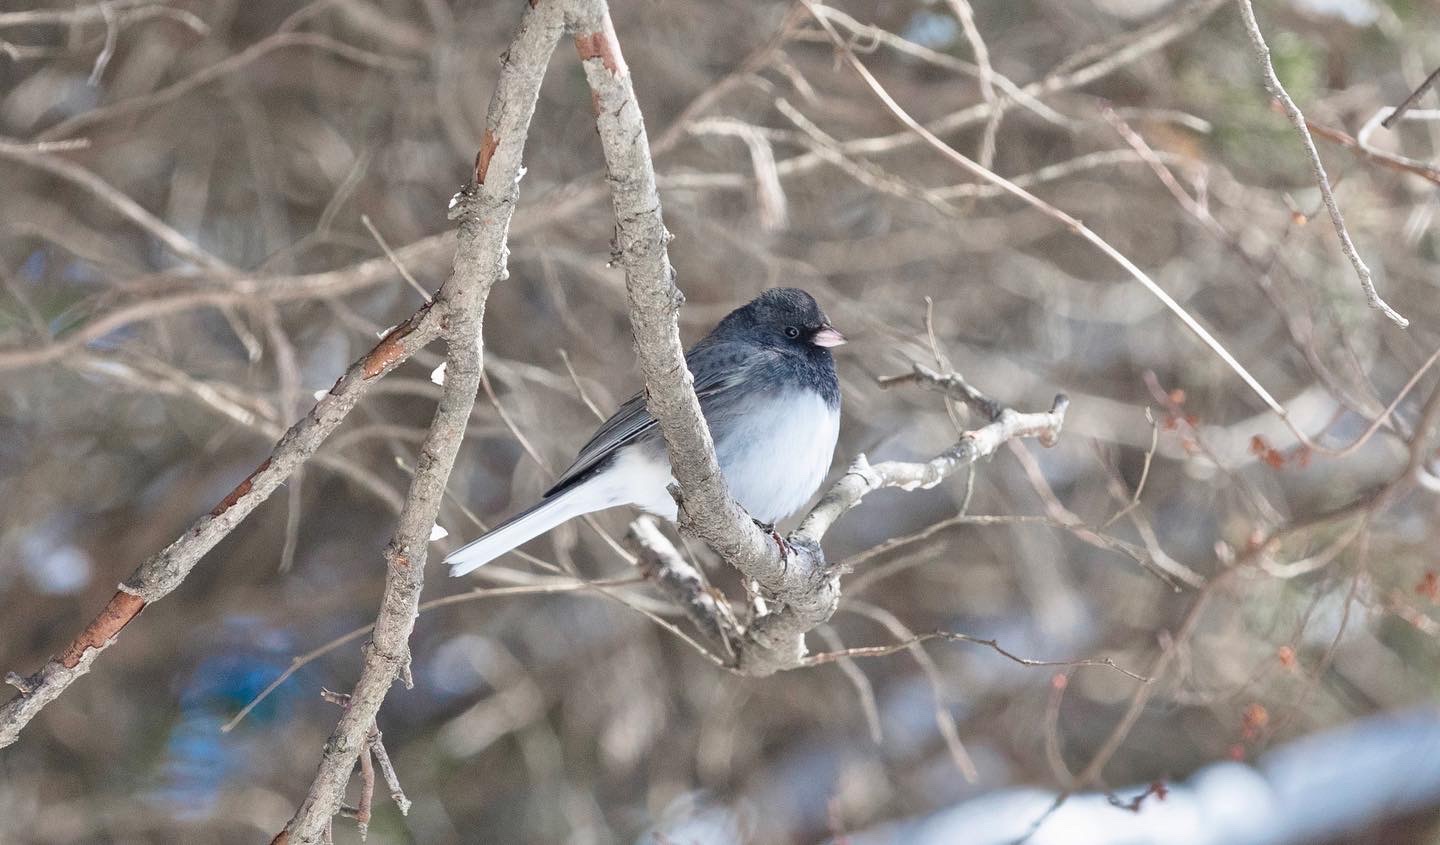 The Dark-eyed Junco is seen in the snow